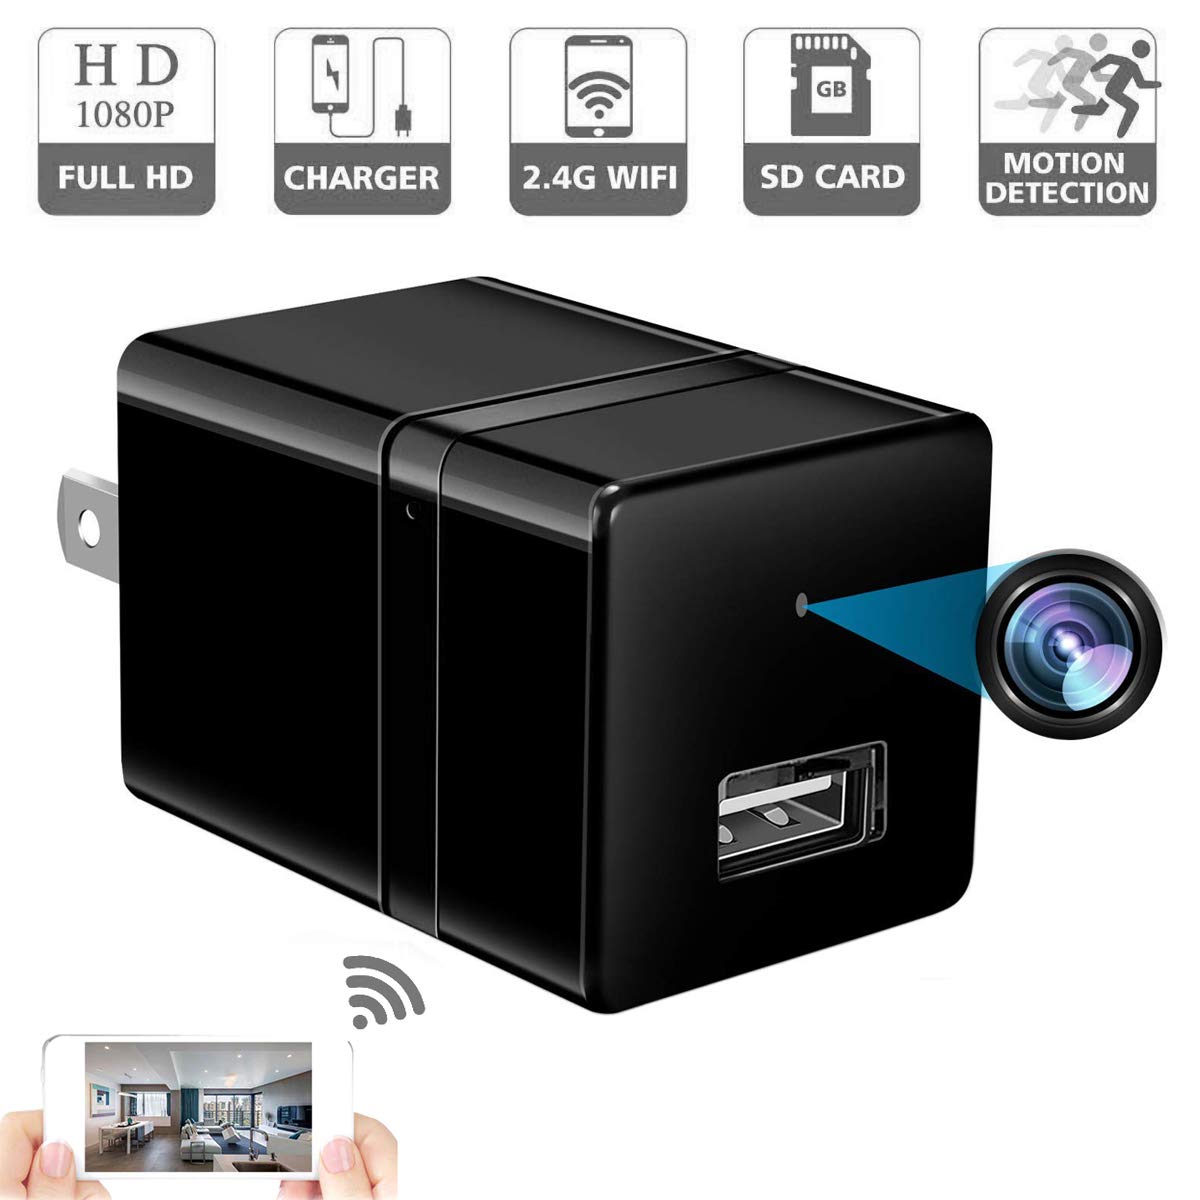 Review of Spy Camera Wireless Hidden - USB Wall Charger Camera -Nanny Cam with Cell Phone App by SPOOKER